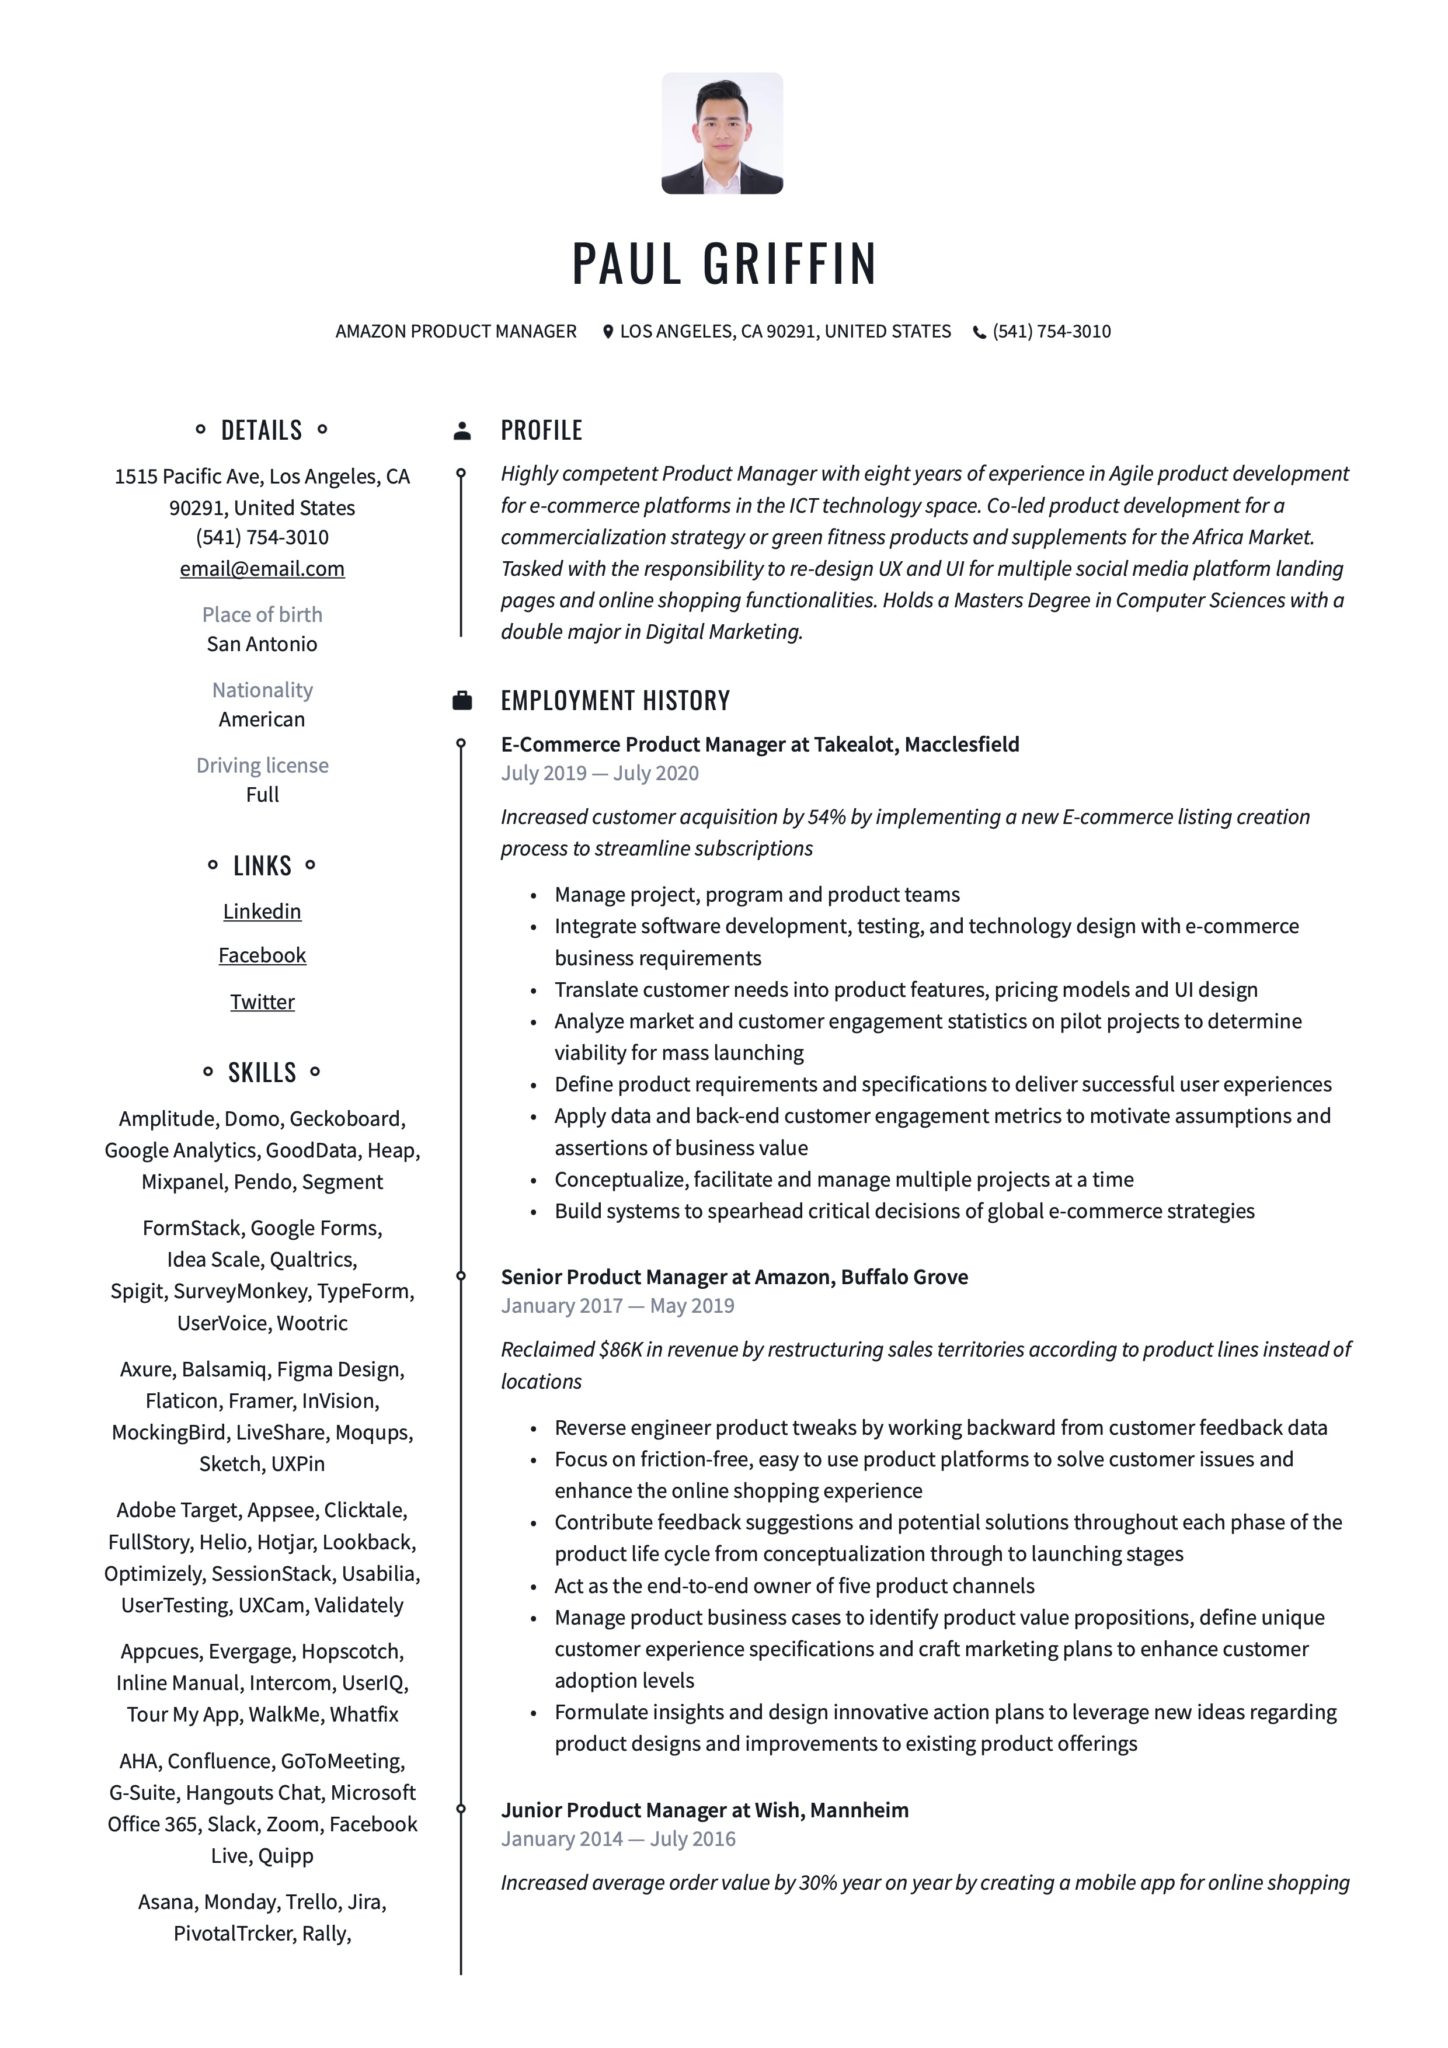 General Laborer at A Potatoes C9mpany Resume Sample Amazon Product Manager Resume & Guide 17 Examples 2022